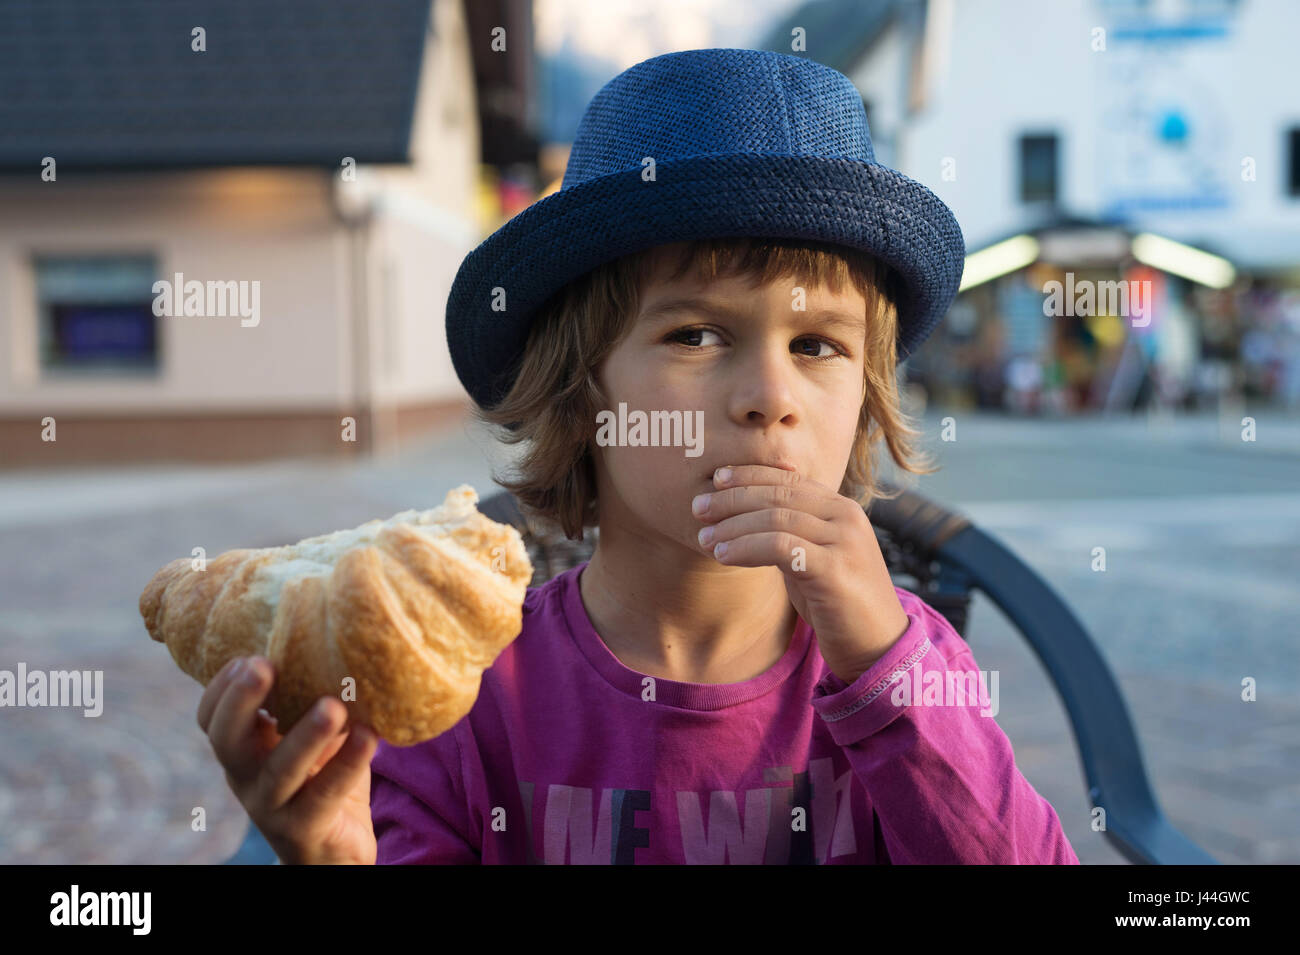 Cute little boy with blue hat sitting at the table eating tasty croissant. Stock Photo